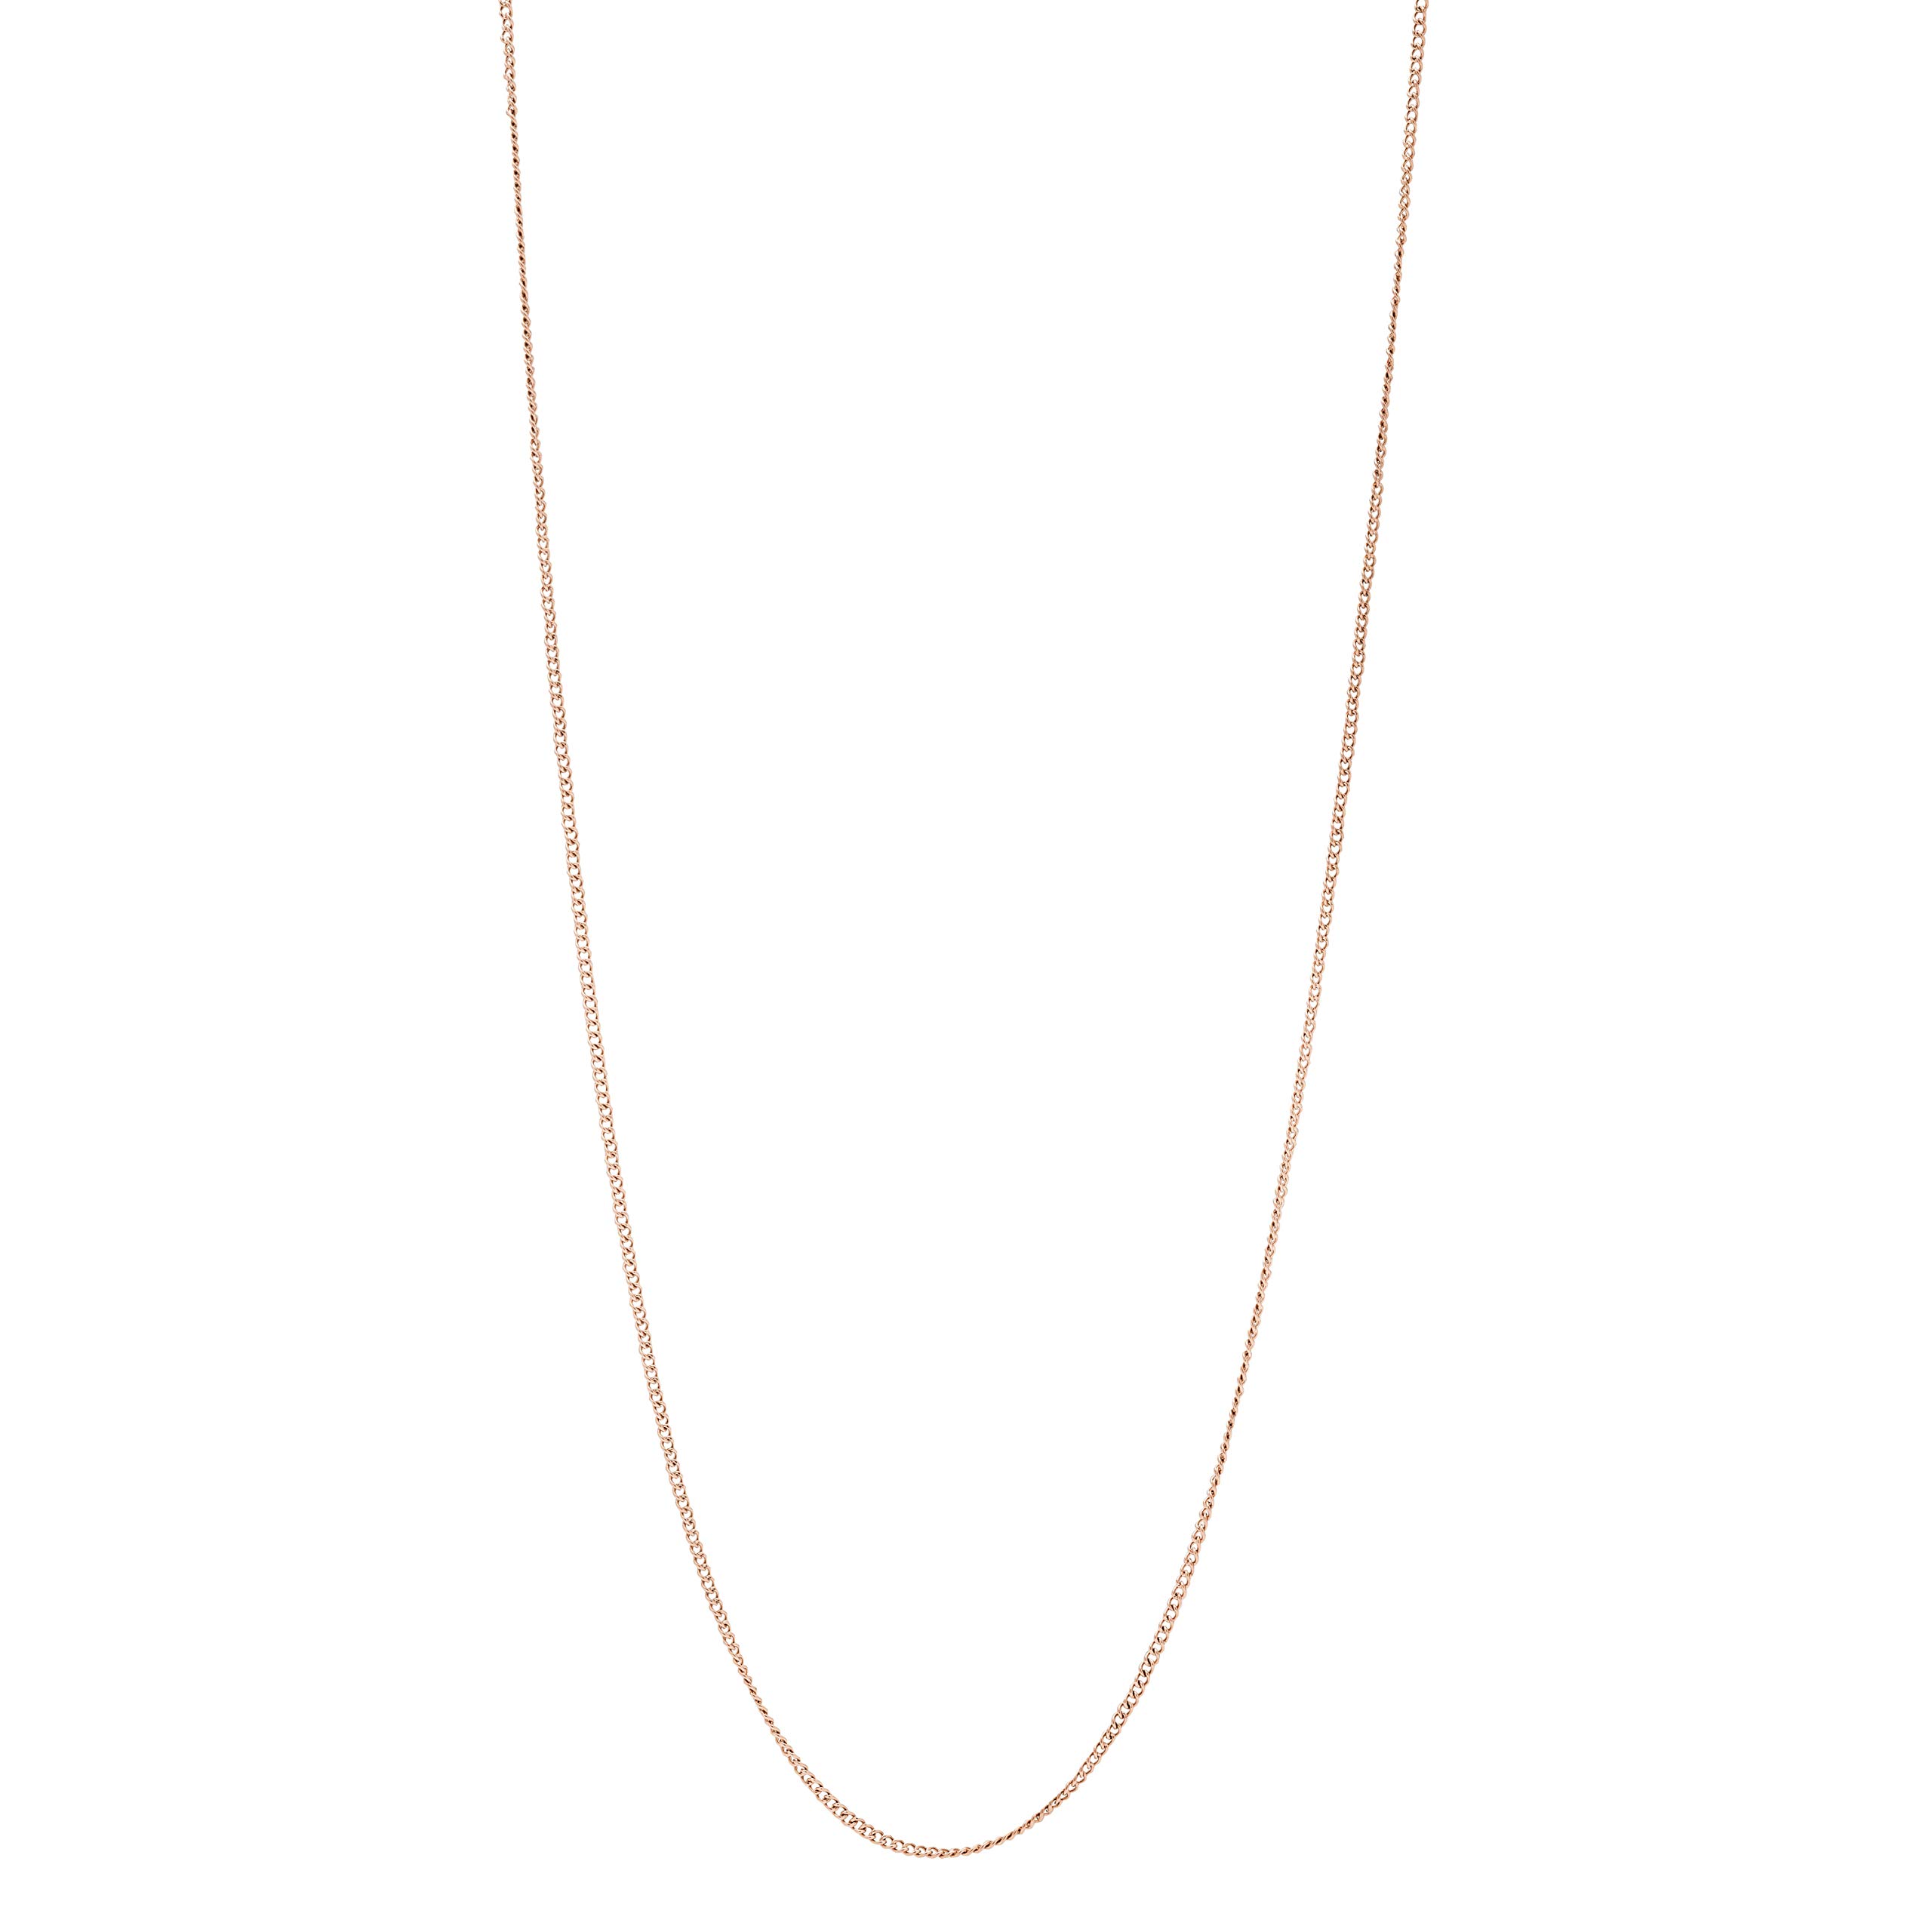 Fossil Women's Rose Gold-Tone Stainless Steel Pendant Chain Necklace